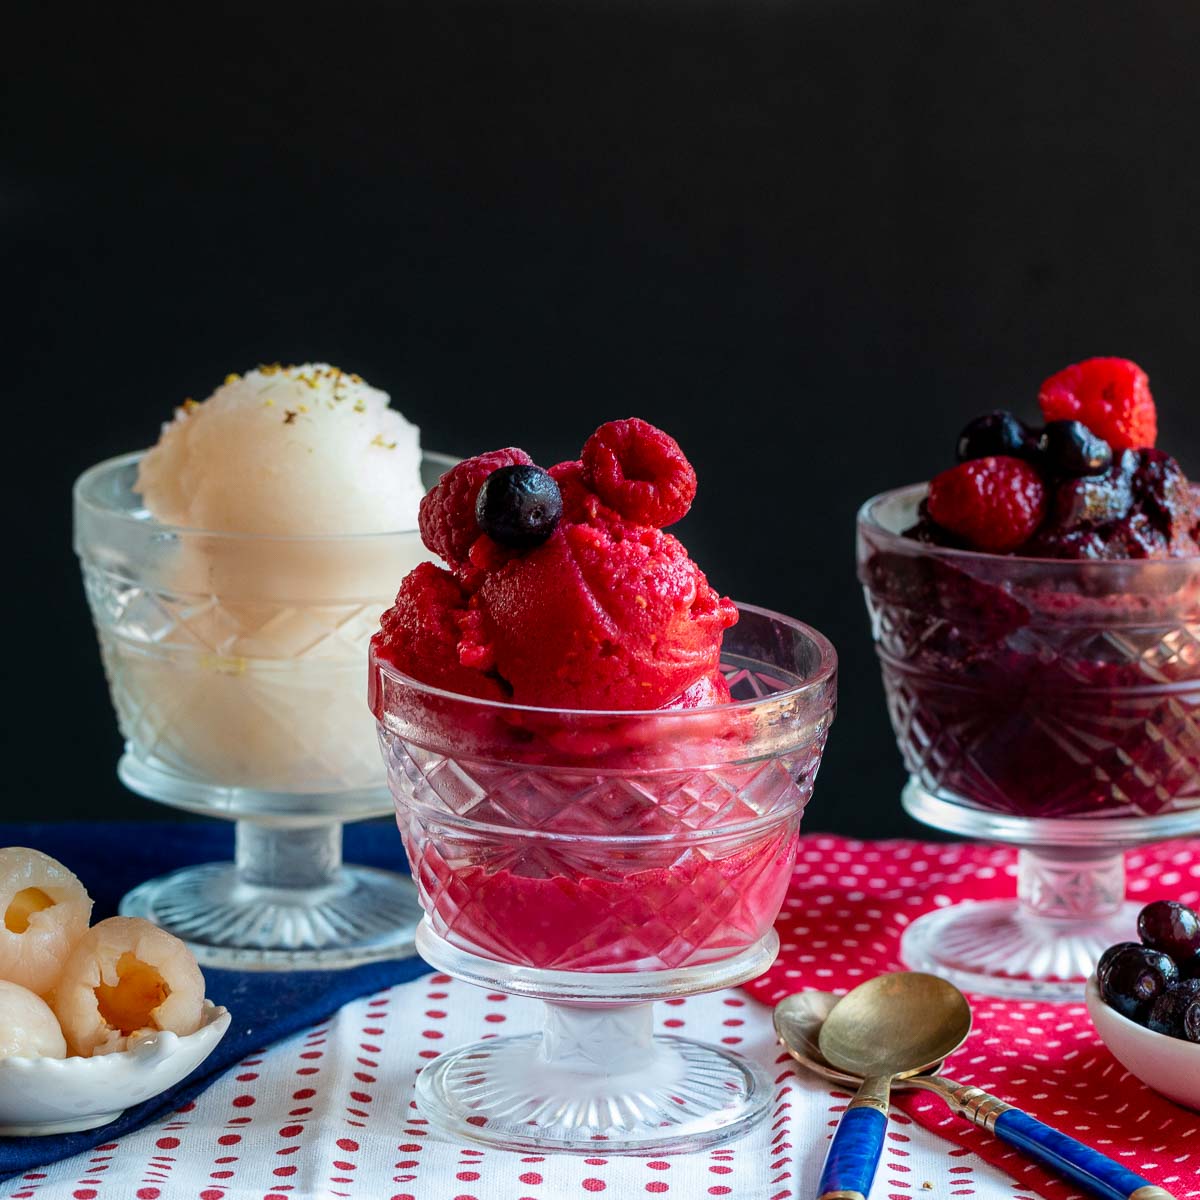 Lychee, raspberry and blueberry sorbets in dainty dessert cups.